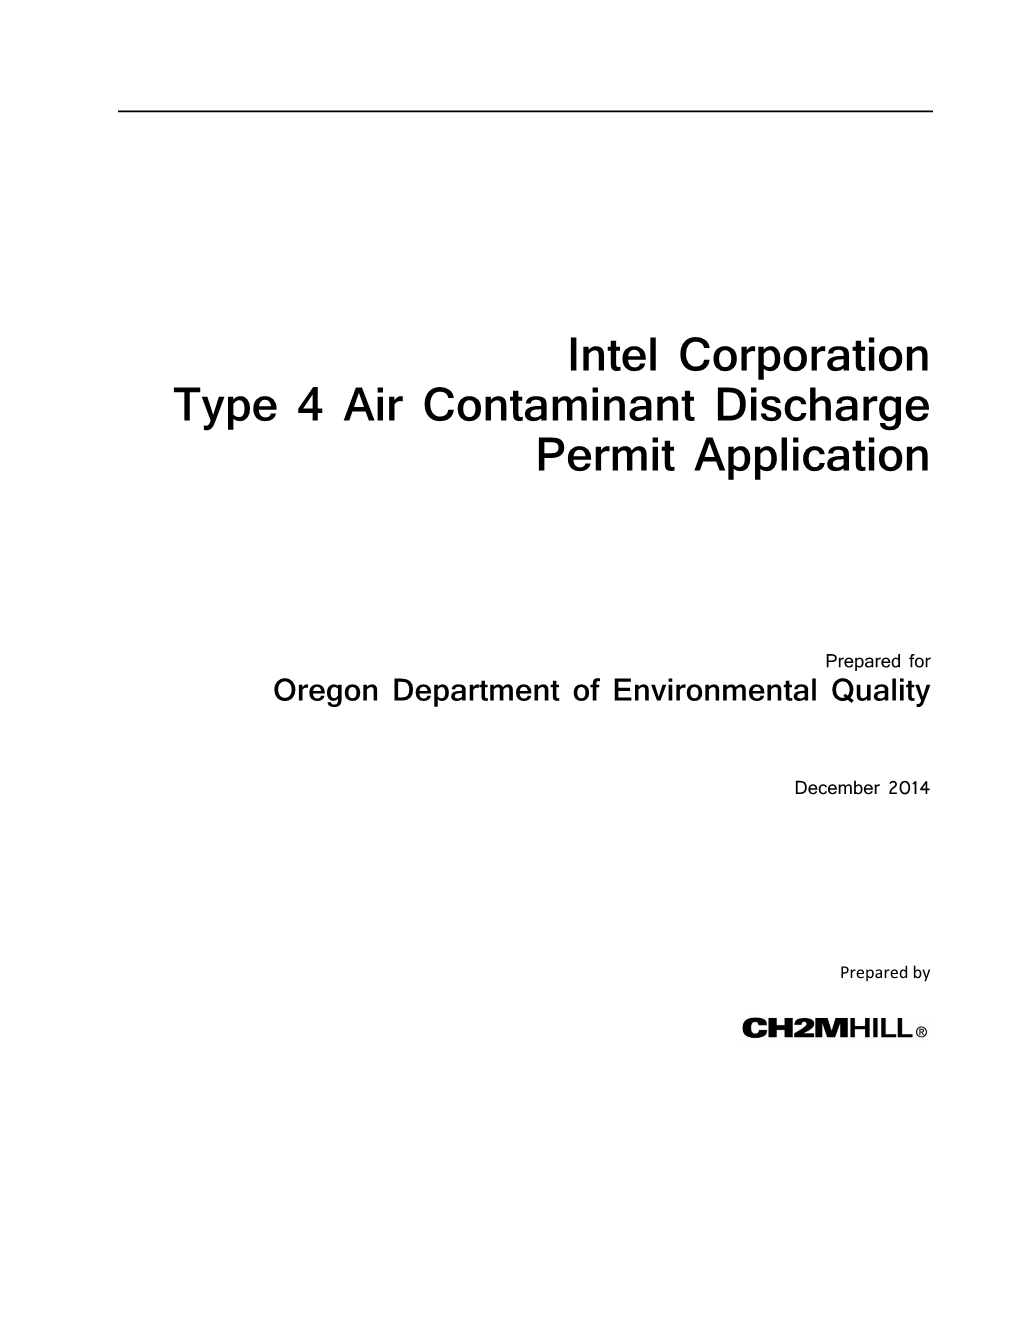 Intel Corporation Type 4 Air Contaminant Discharge Permit Application